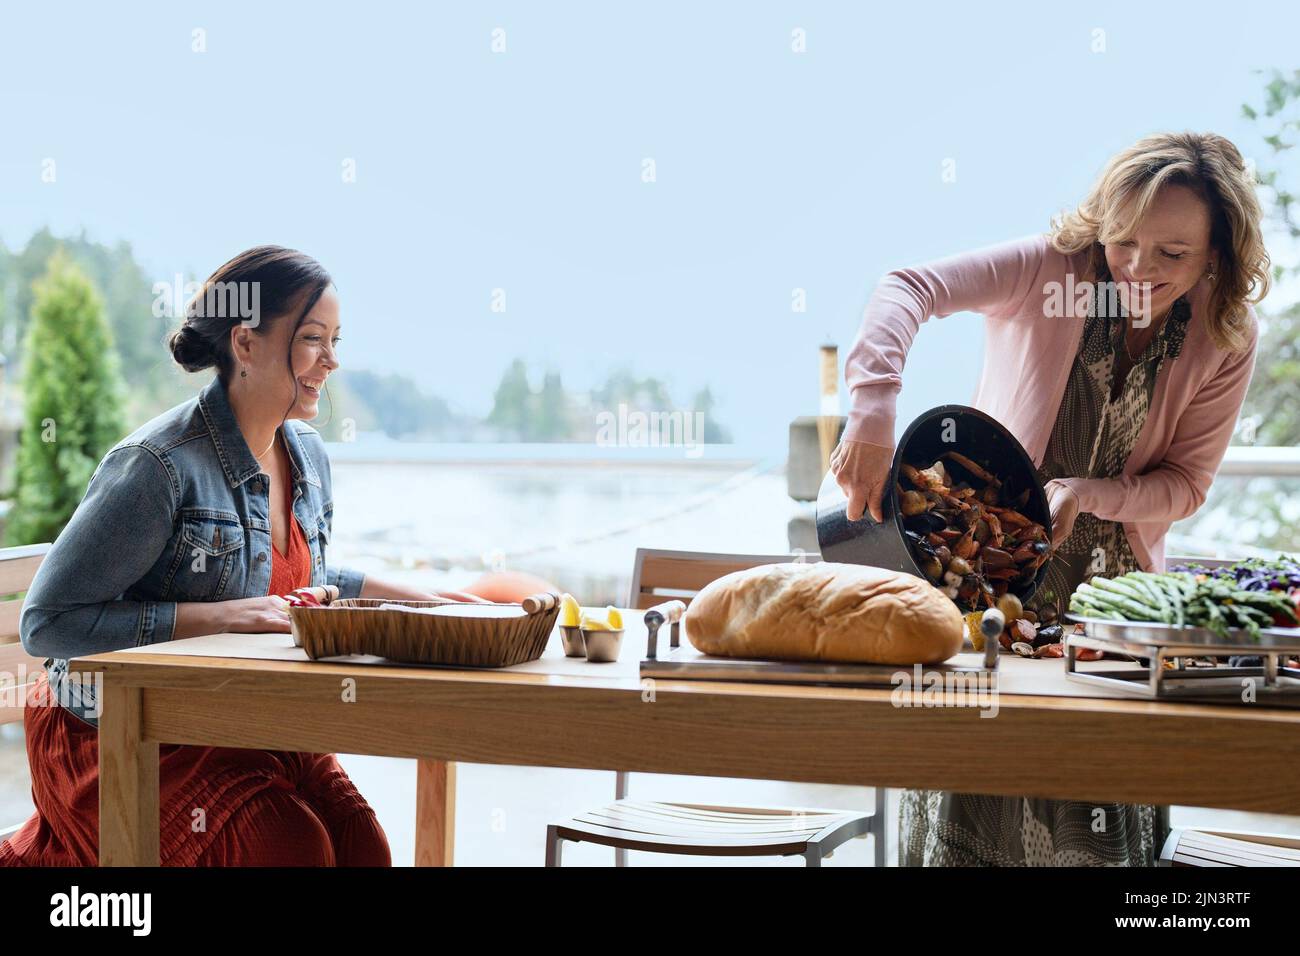 A SPLASH OF LOVE, from left: Juliana Wimbles, Laura Soltis, (aired July 30, 2022). photo: ©Hallmark Channel / Courtesy Everett Collection Stock Photo